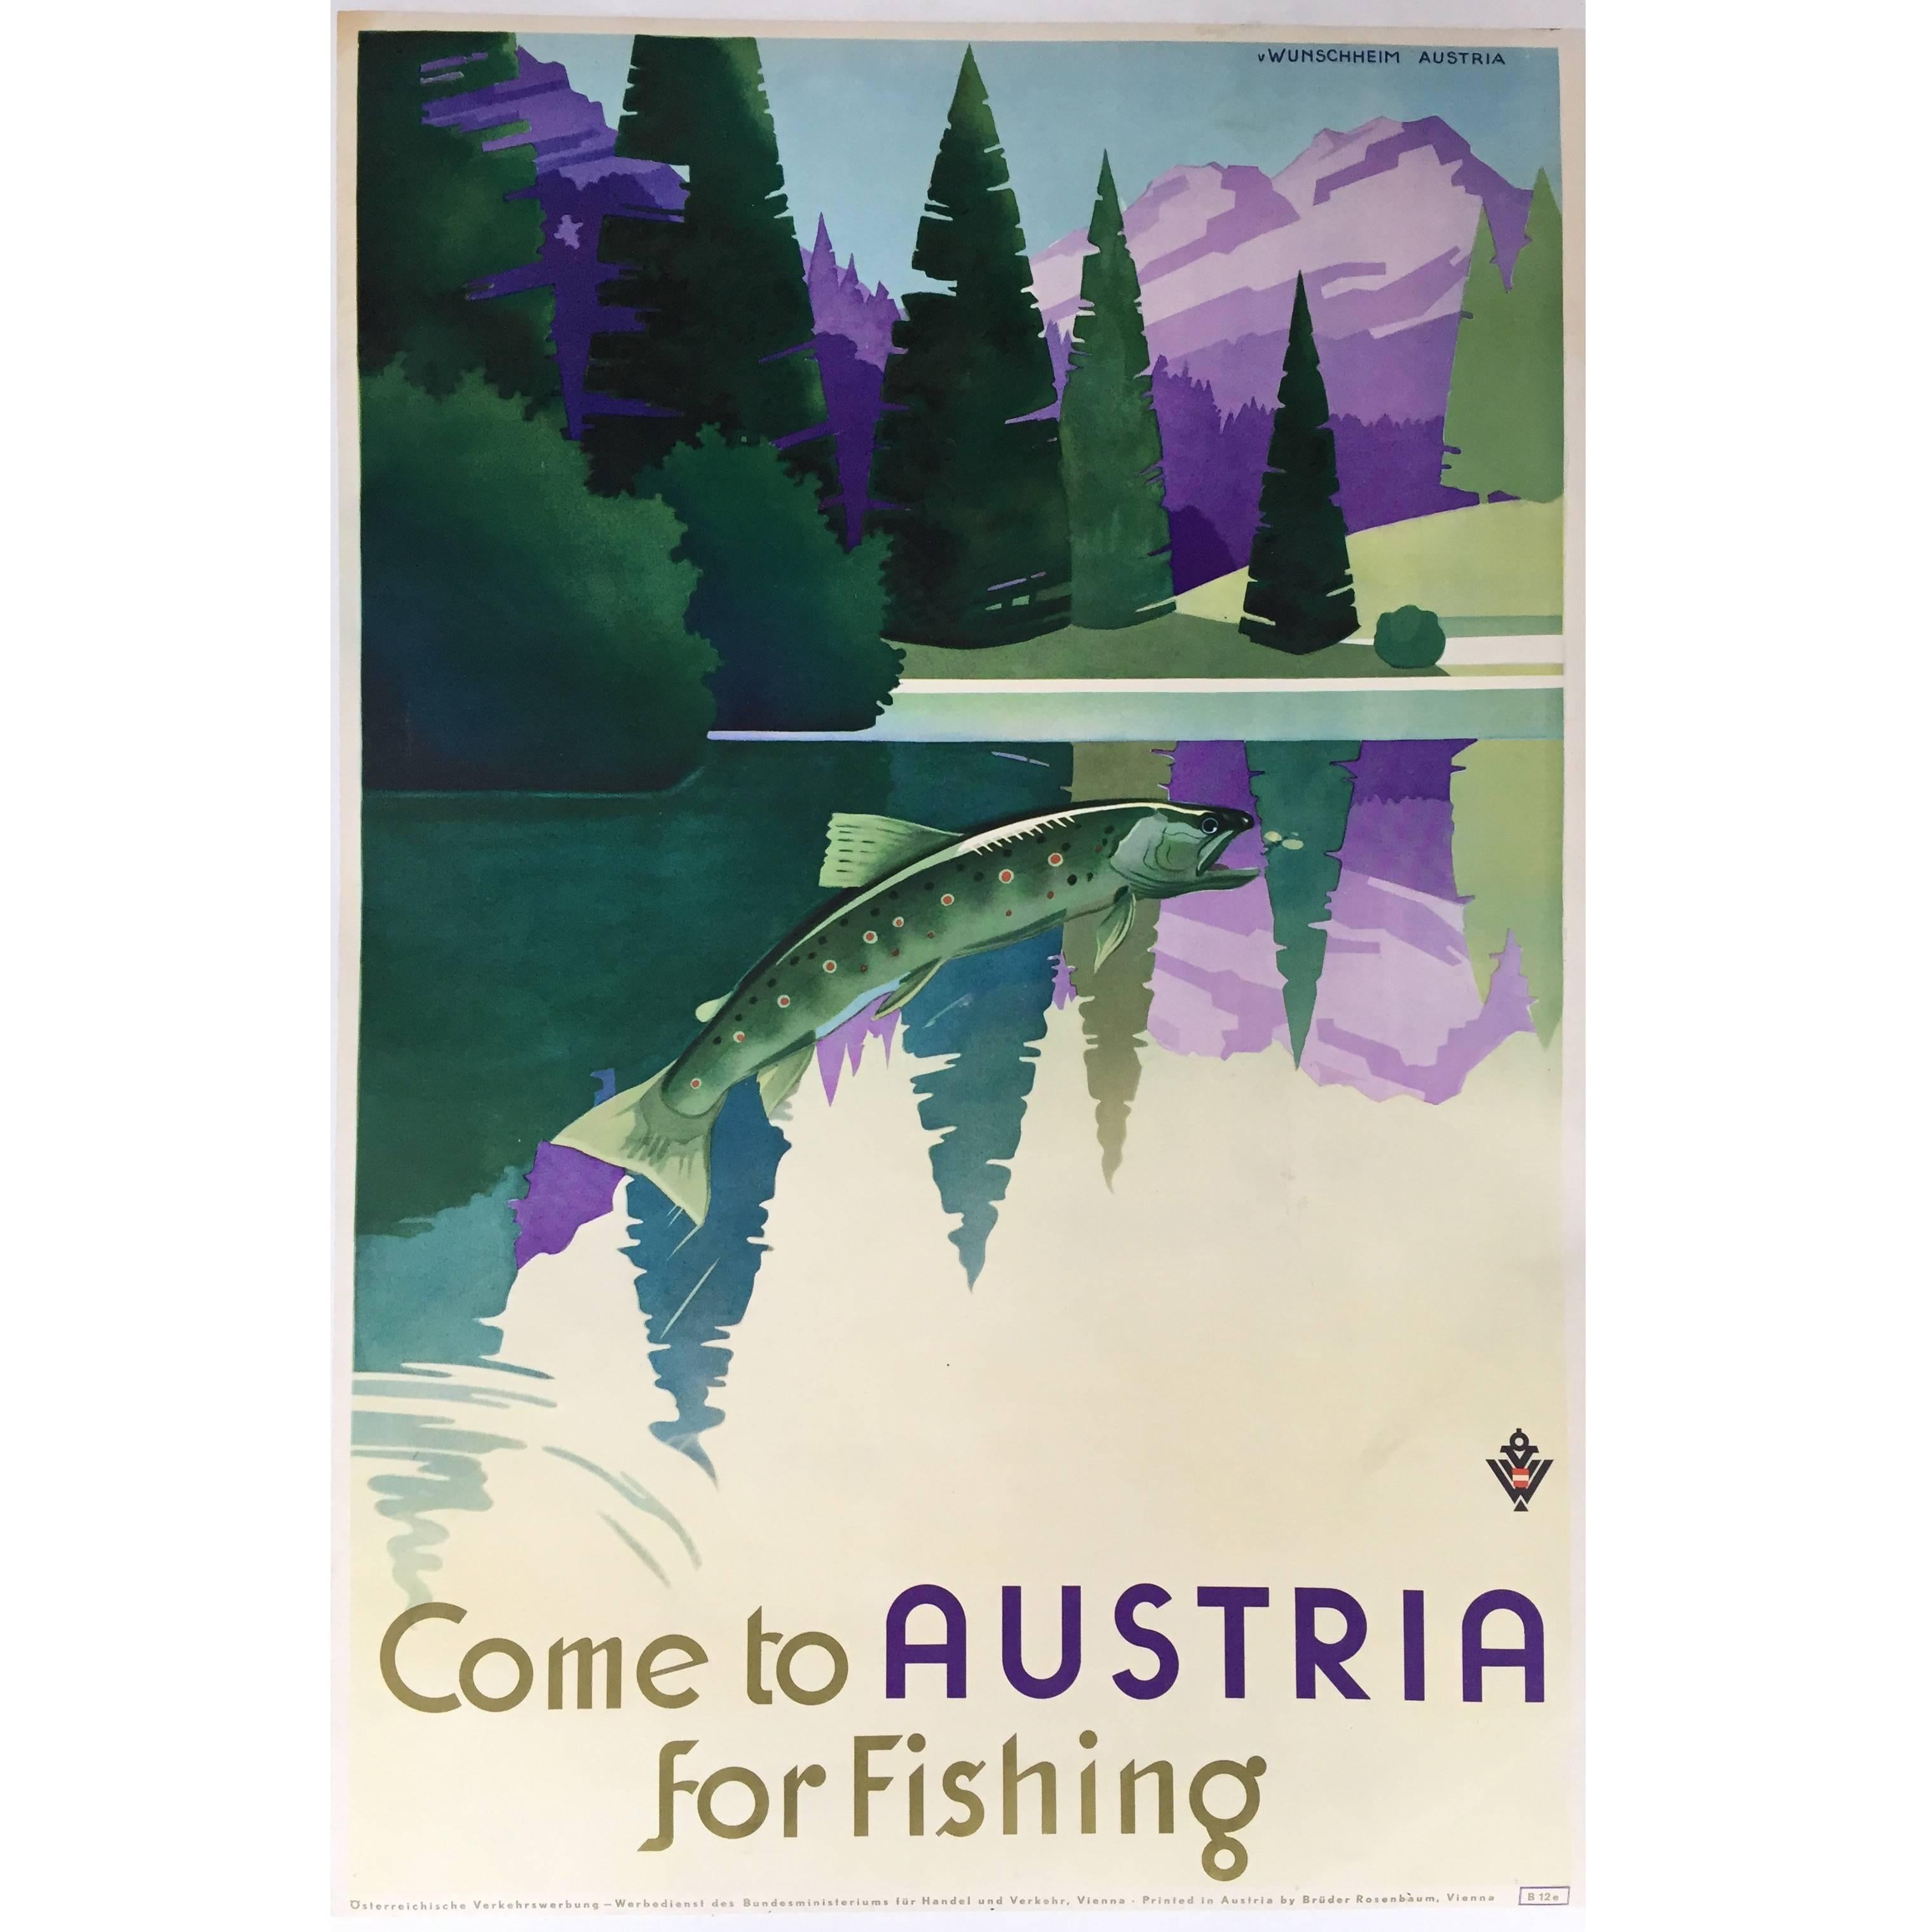 Great Vintage Poster Promoting Fishing in Austria